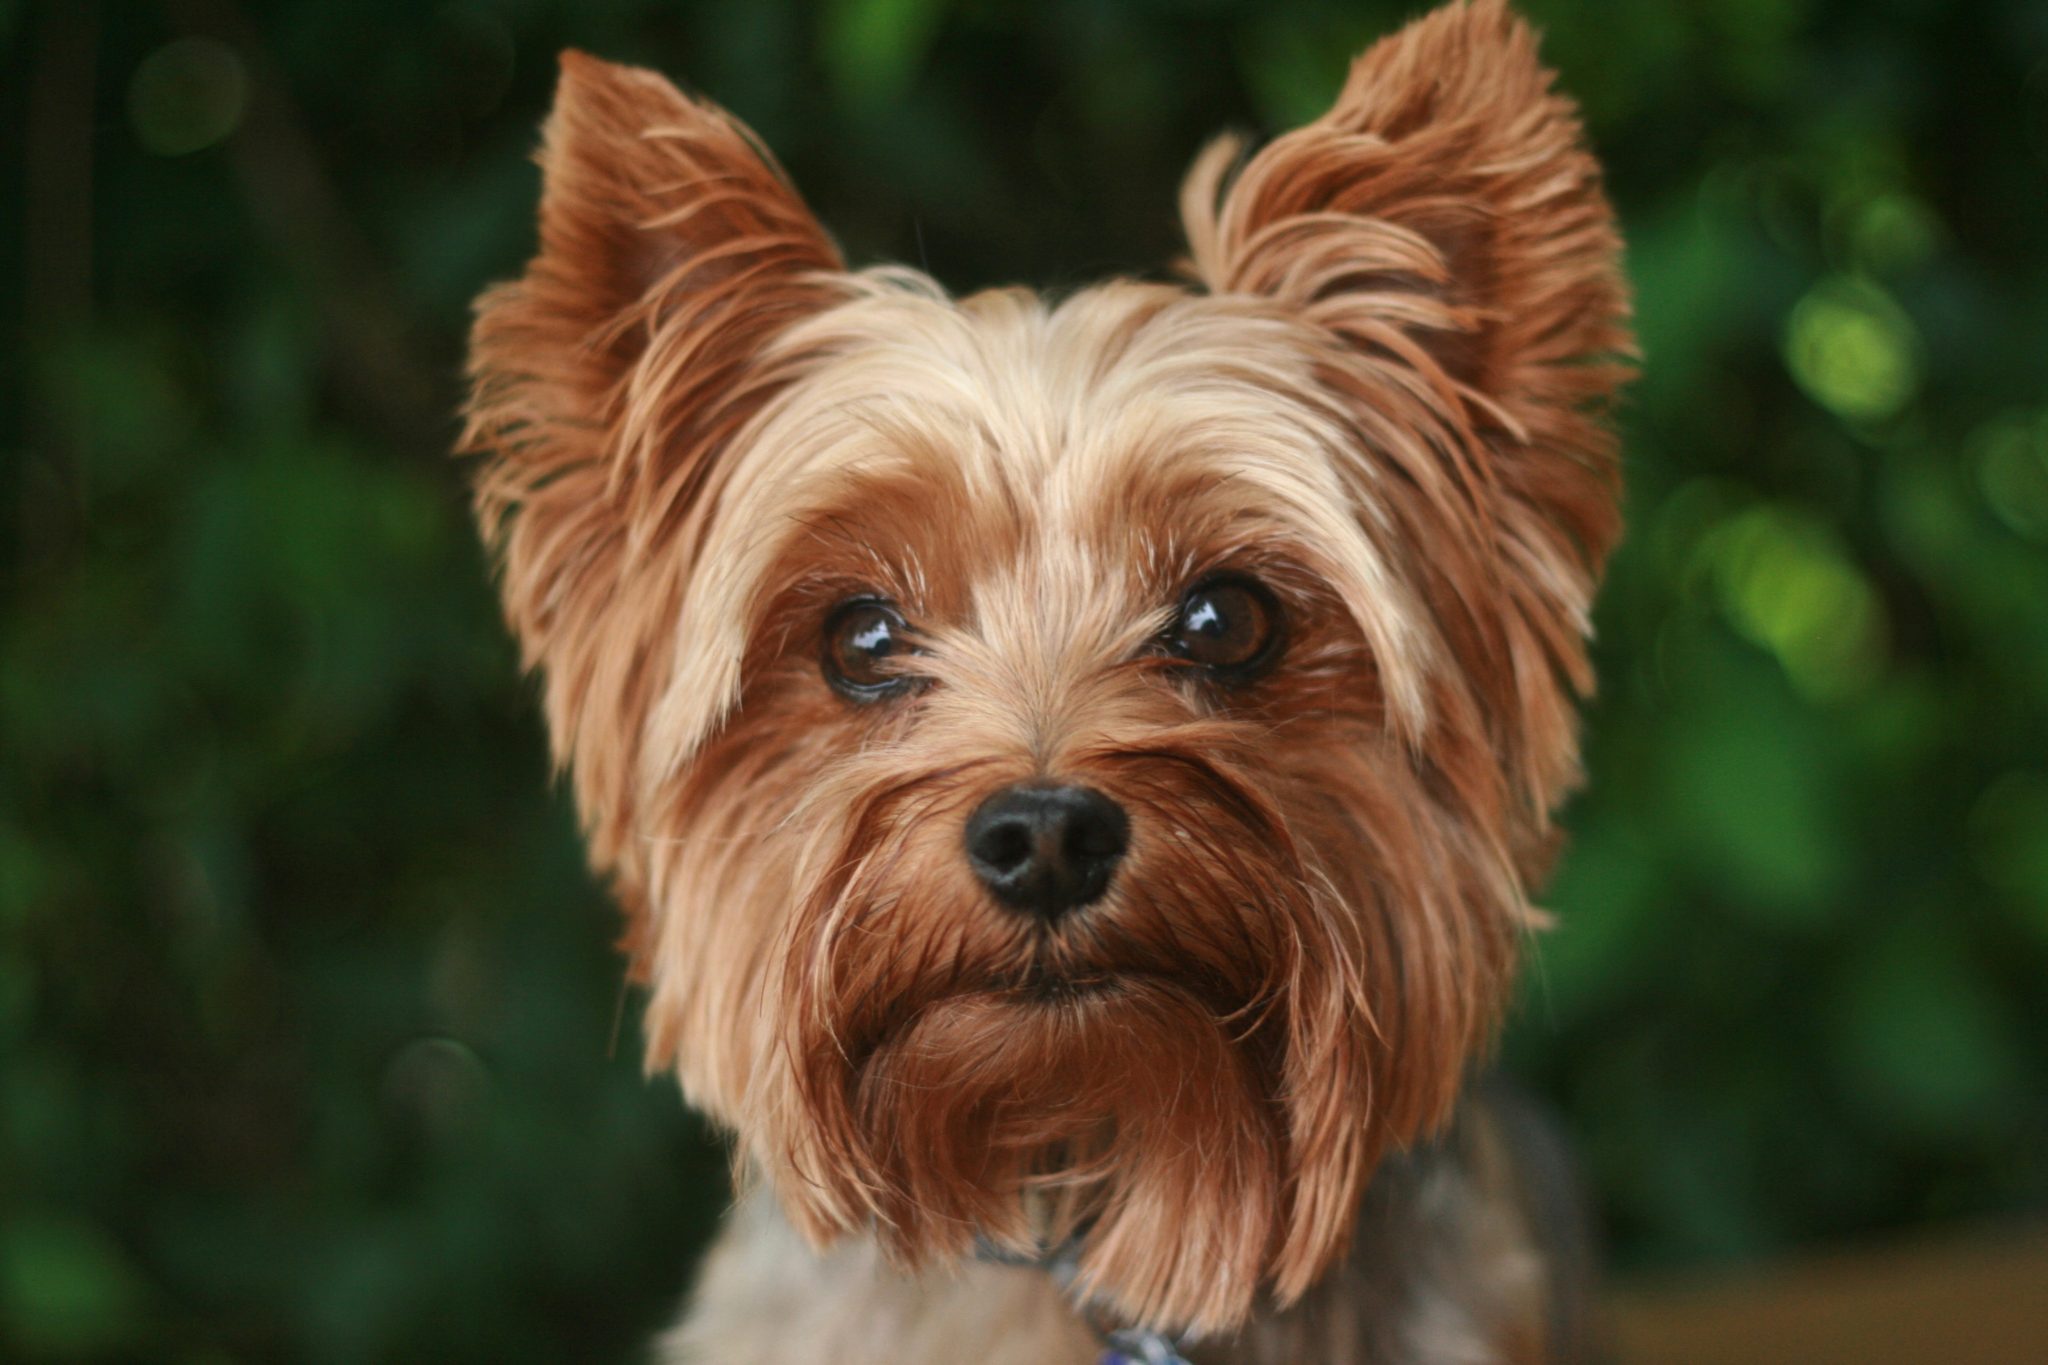 A Yorkie dog is compatible with the zodiac sign Libra